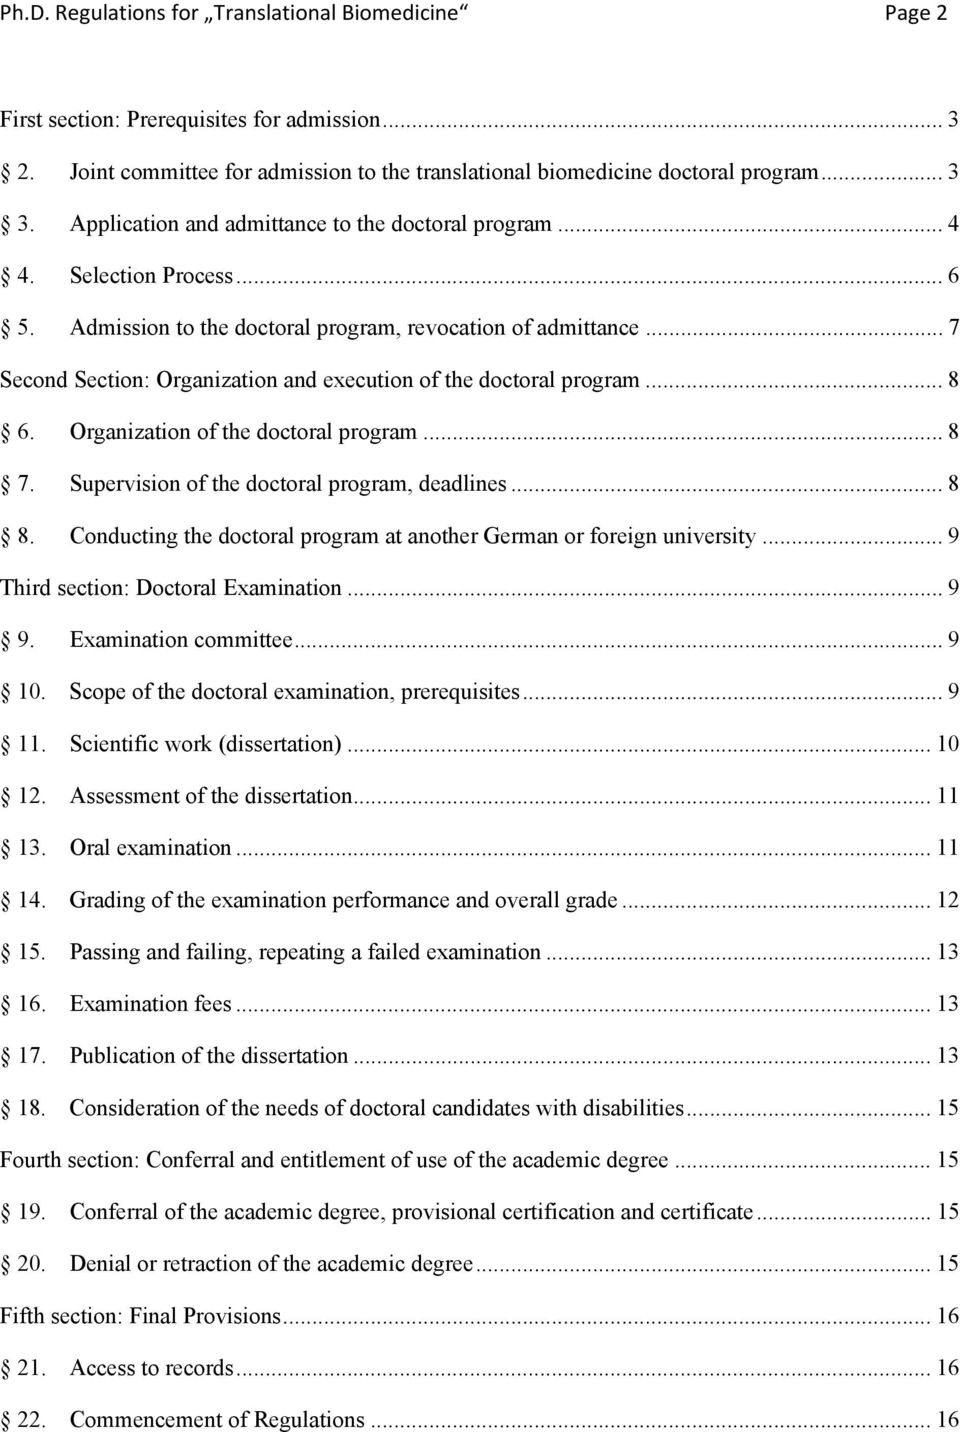 .. 7 Second Section: Organization and execution of the doctoral program... 8 6. Organization of the doctoral program... 8 7. Supervision of the doctoral program, deadlines... 8 8.